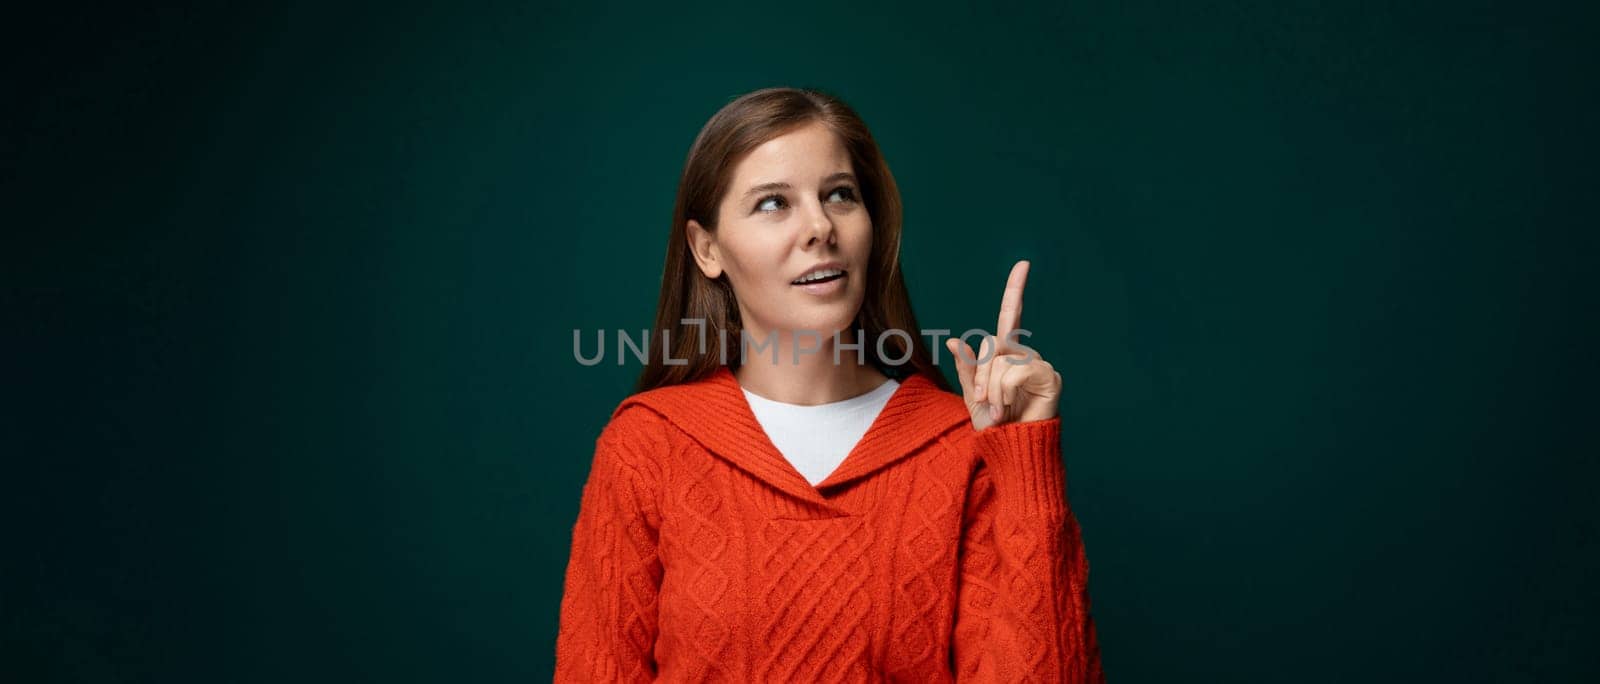 Portrait of a smart young woman in a red sweater who is thinking about something and looking up by TRMK